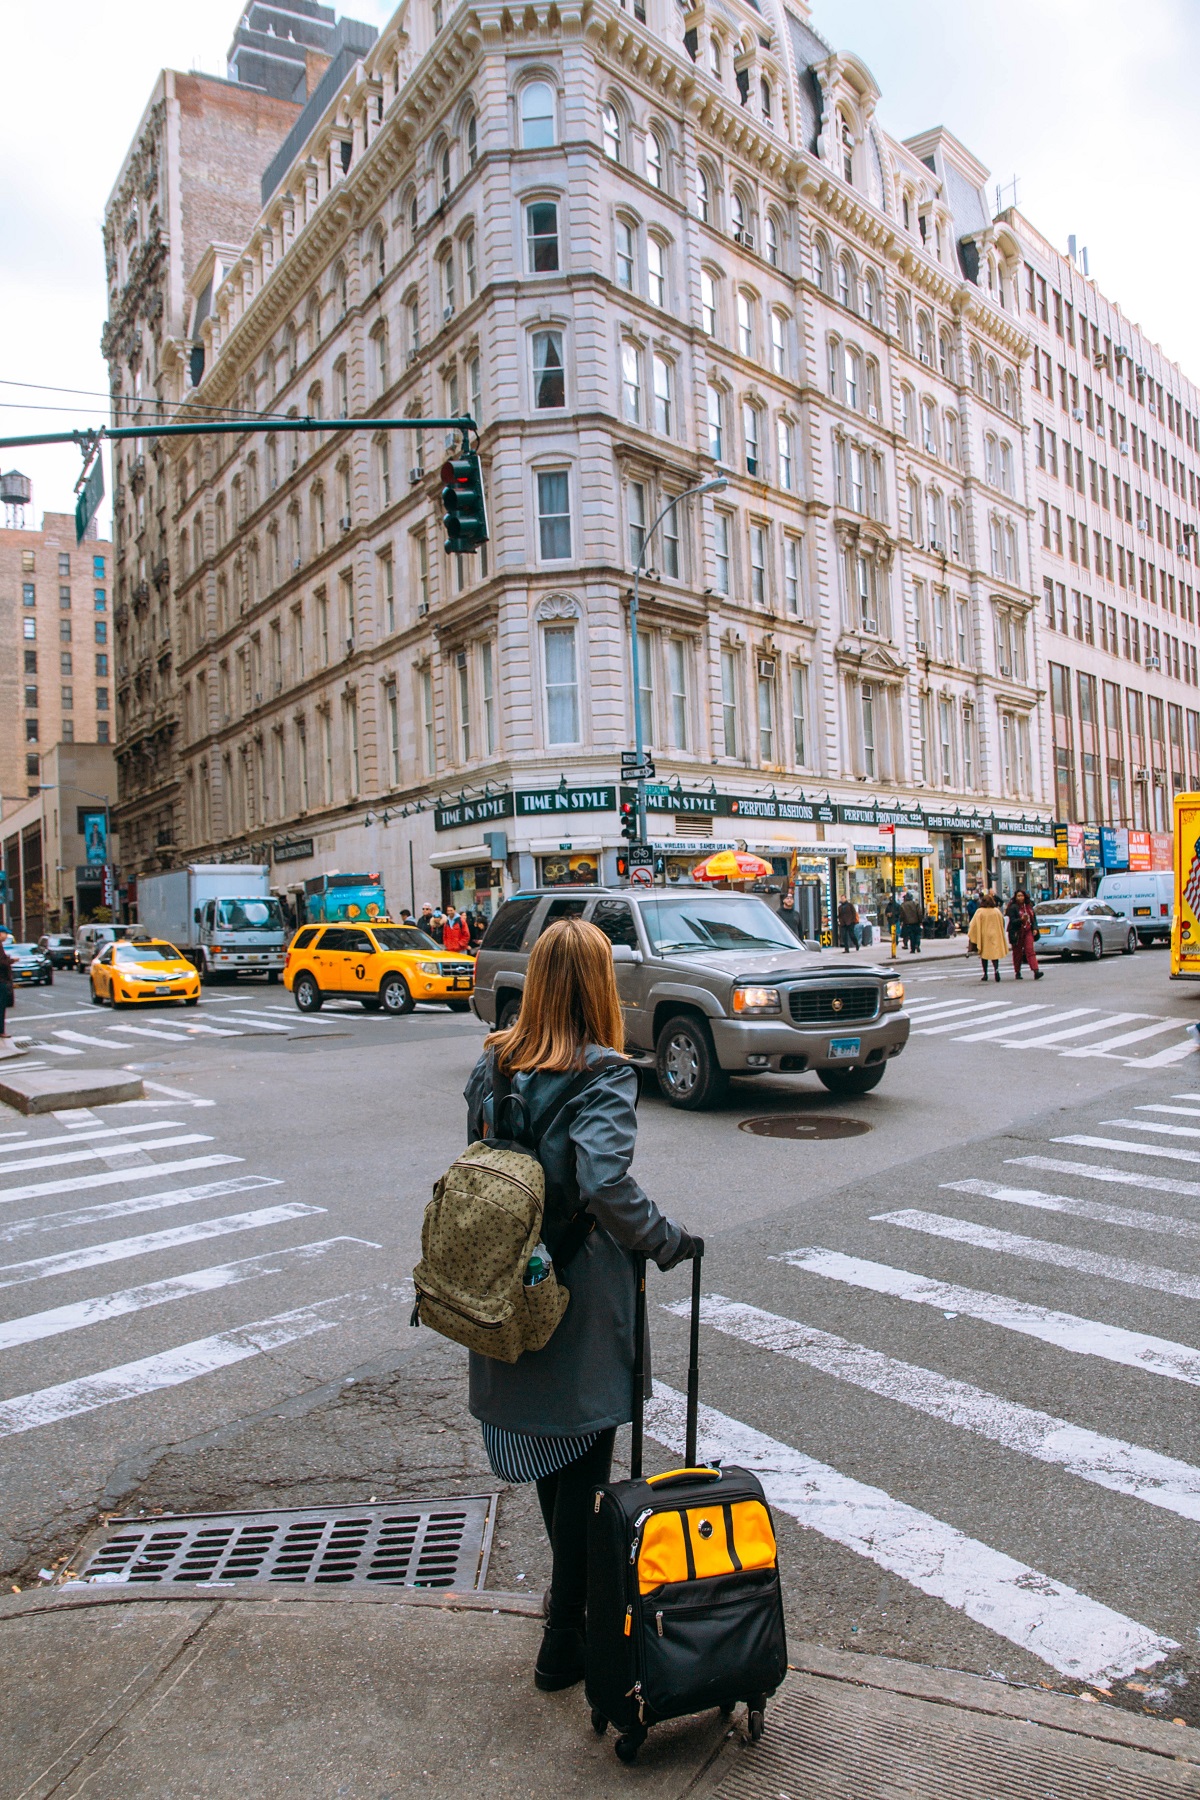 A woman with a suitcase waits at a busy crosswalk in the middle of a city